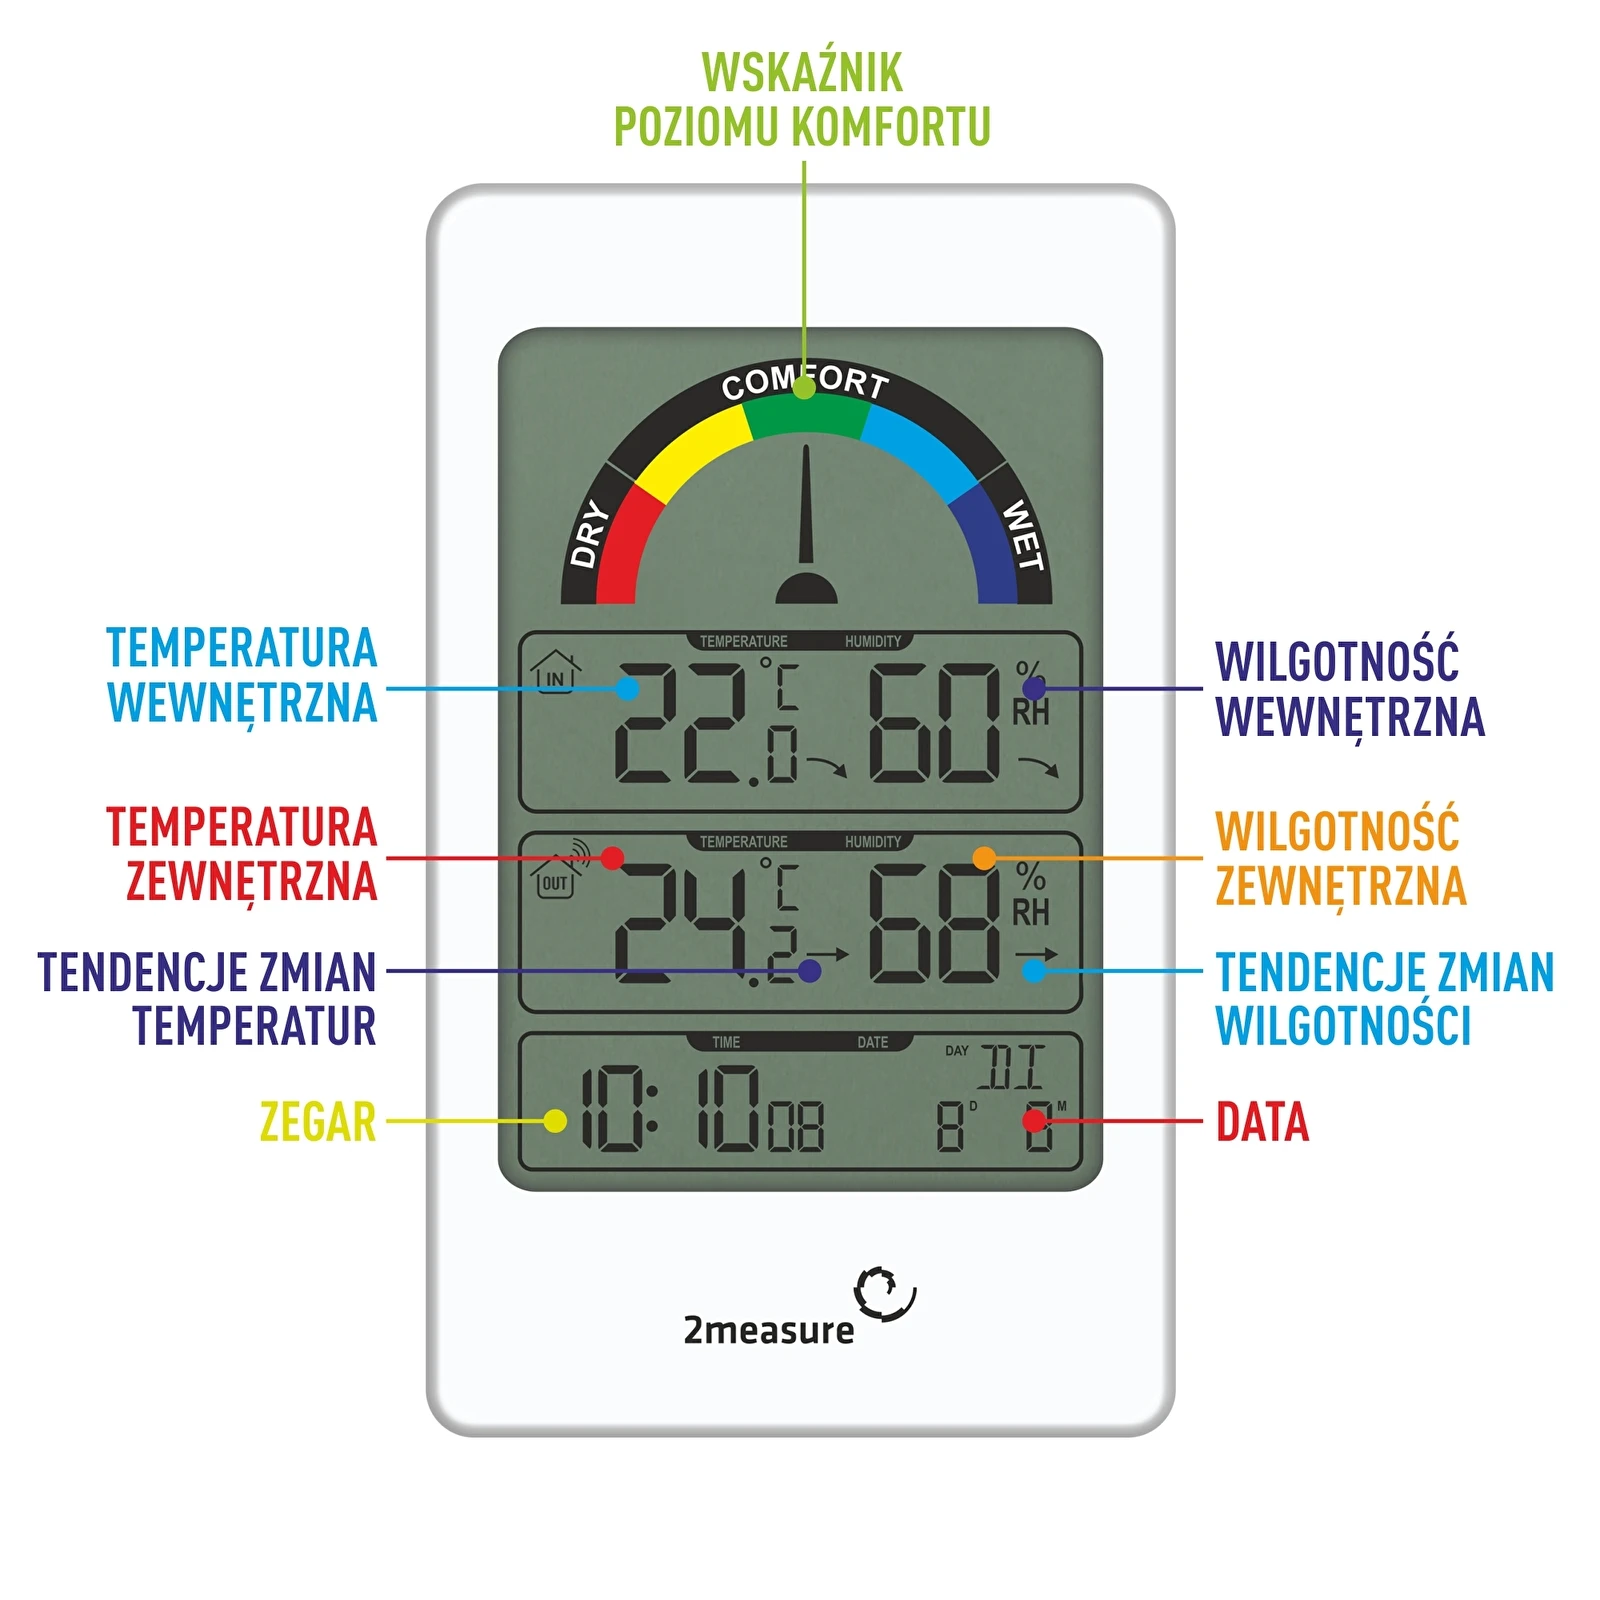 https://browin.com/static/images/1600/weather-station-electronic-rcc-sensor-thermometer-and-hygrometer-250202_10.webp